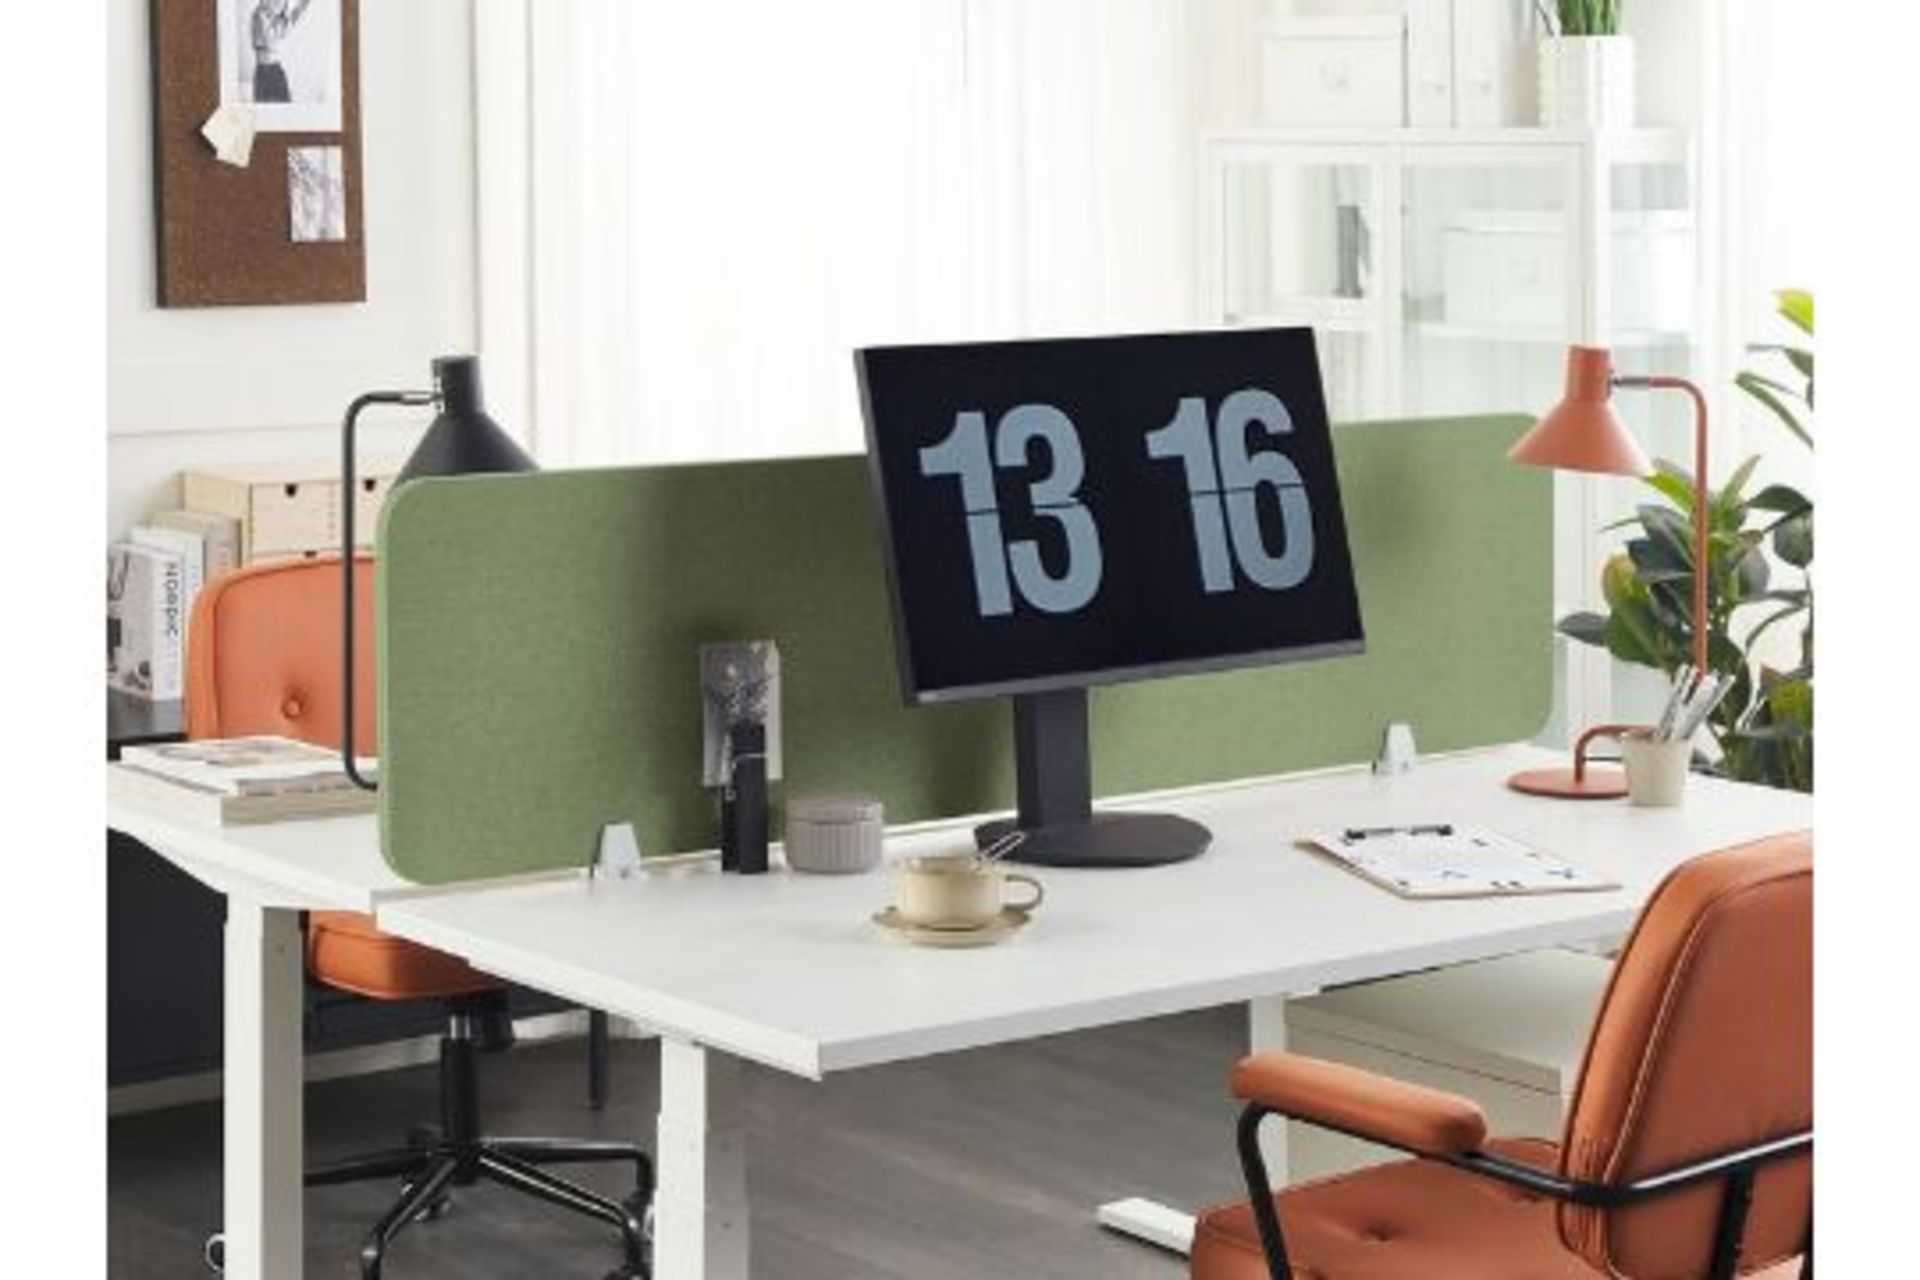 Wally Desk Screen 130 x 40 cm Green 24/12. - ER24. RRP £239.99. Want to set boundaries for your